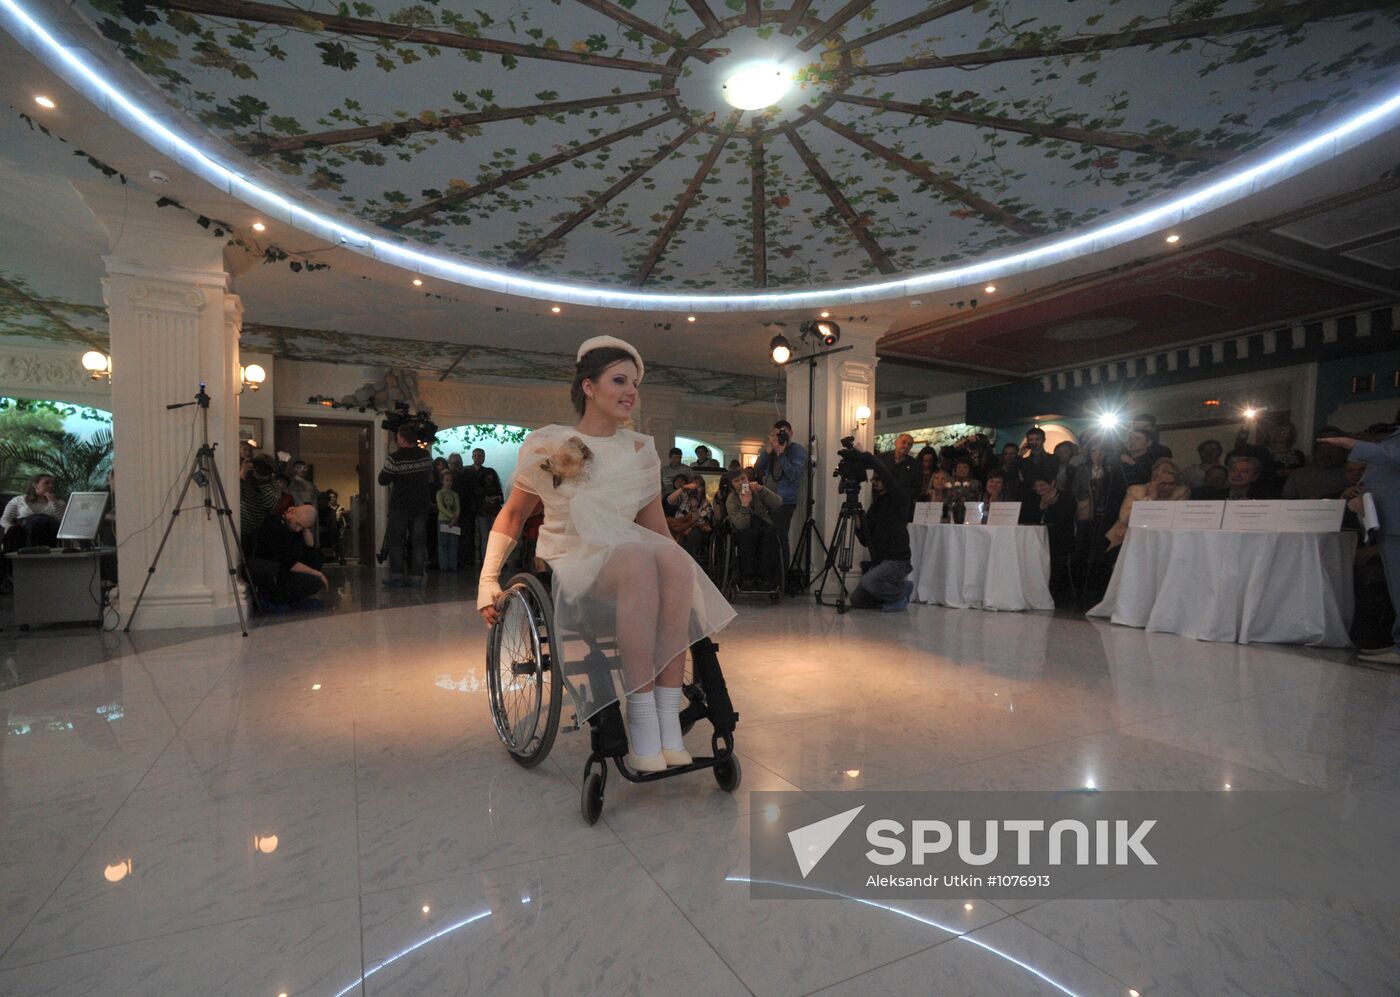 Beauty pageant for disabled women